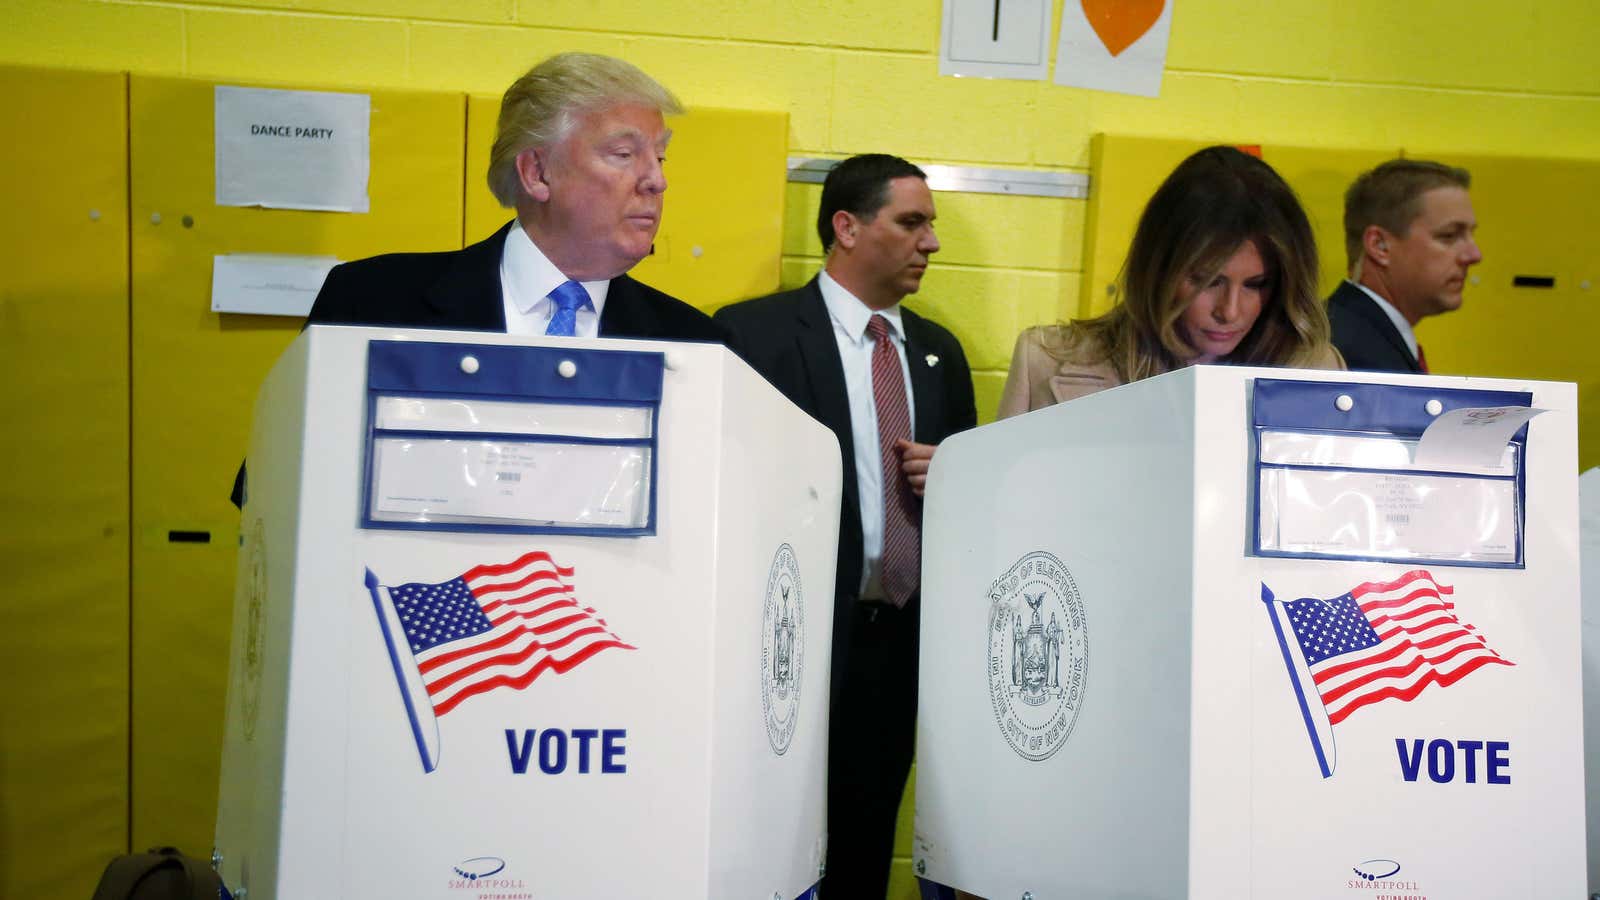 Republican presidential nominee Donald Trump and his wife Melania Trump vote at PS 59 in New York, New York.